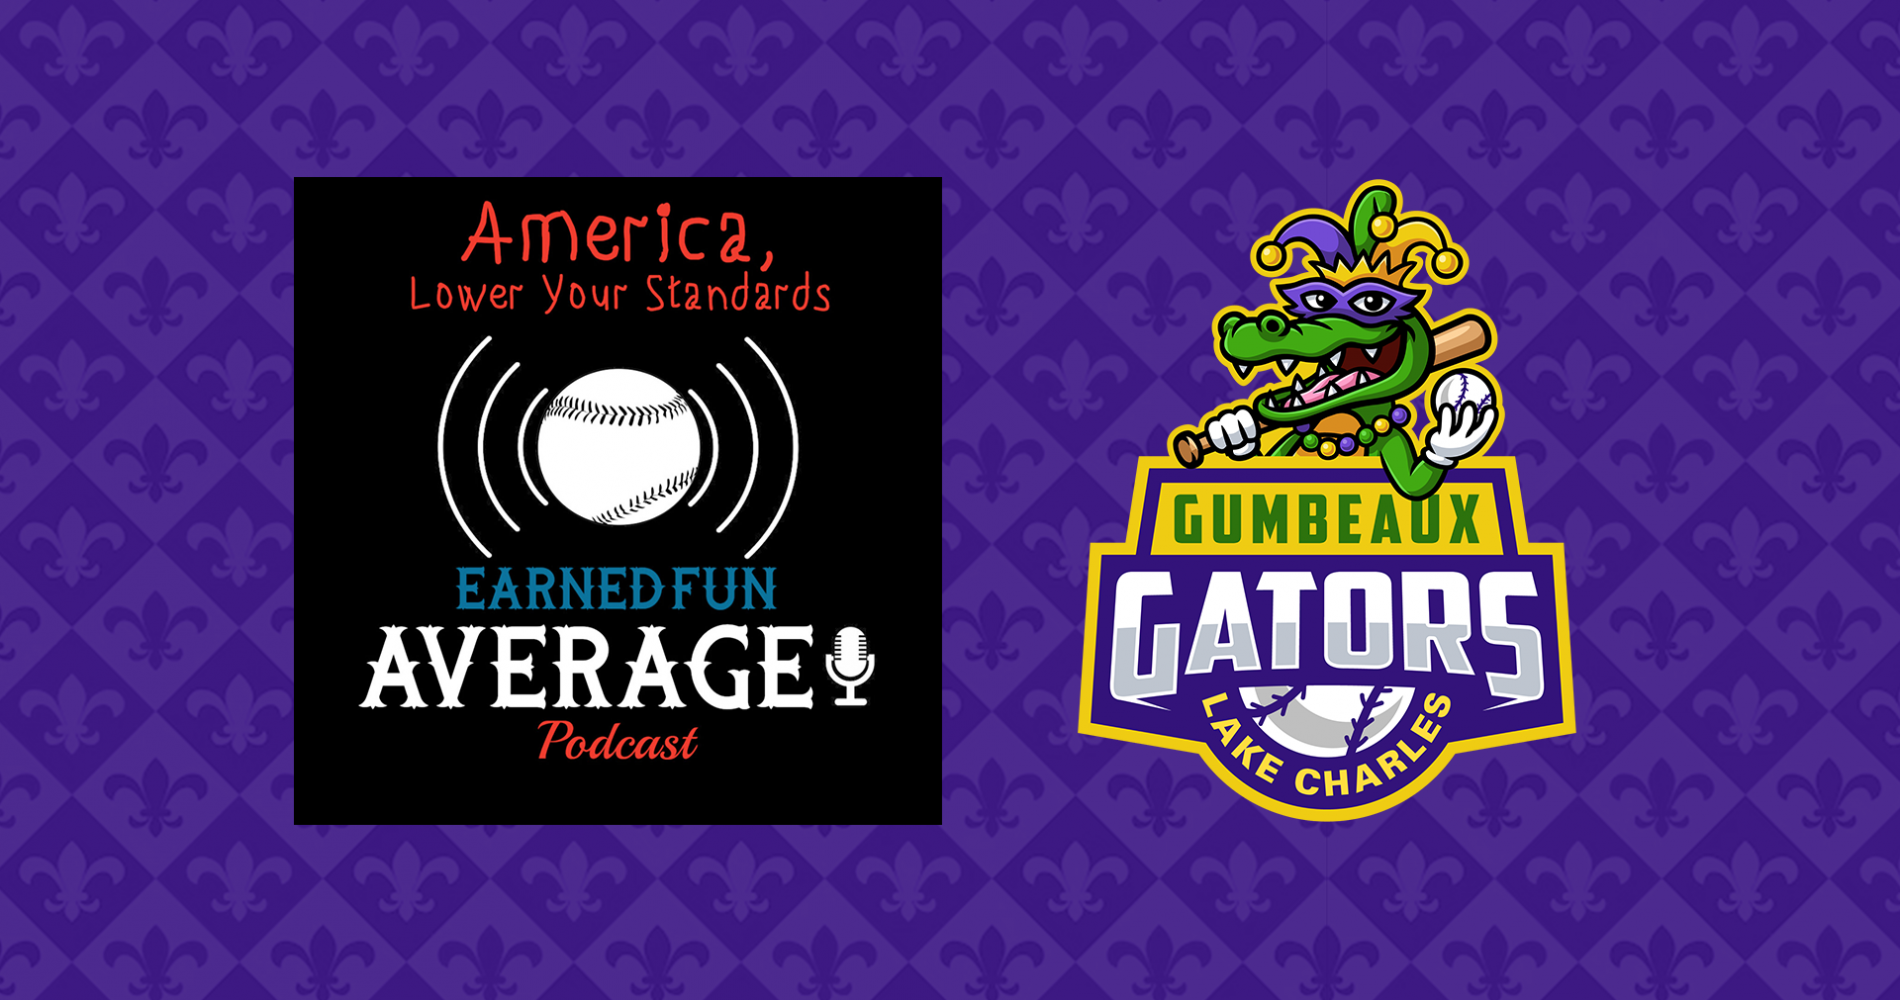 Gumbeaux Gators Featured on Earned Run Average Podcast